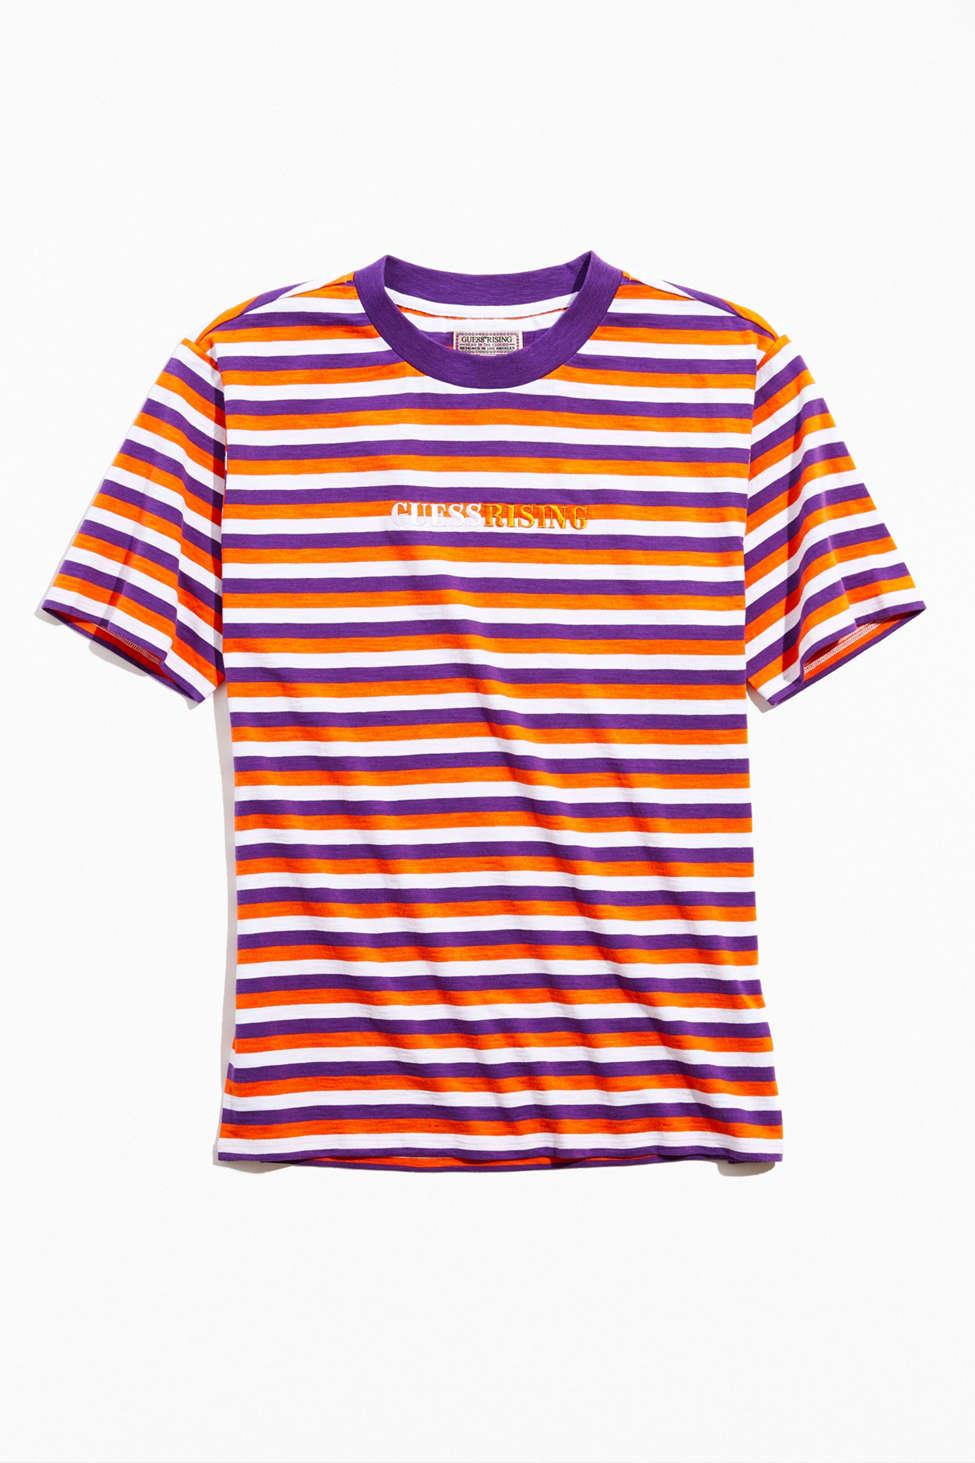 Guess Guess X Stripe Tee in for Men - Lyst